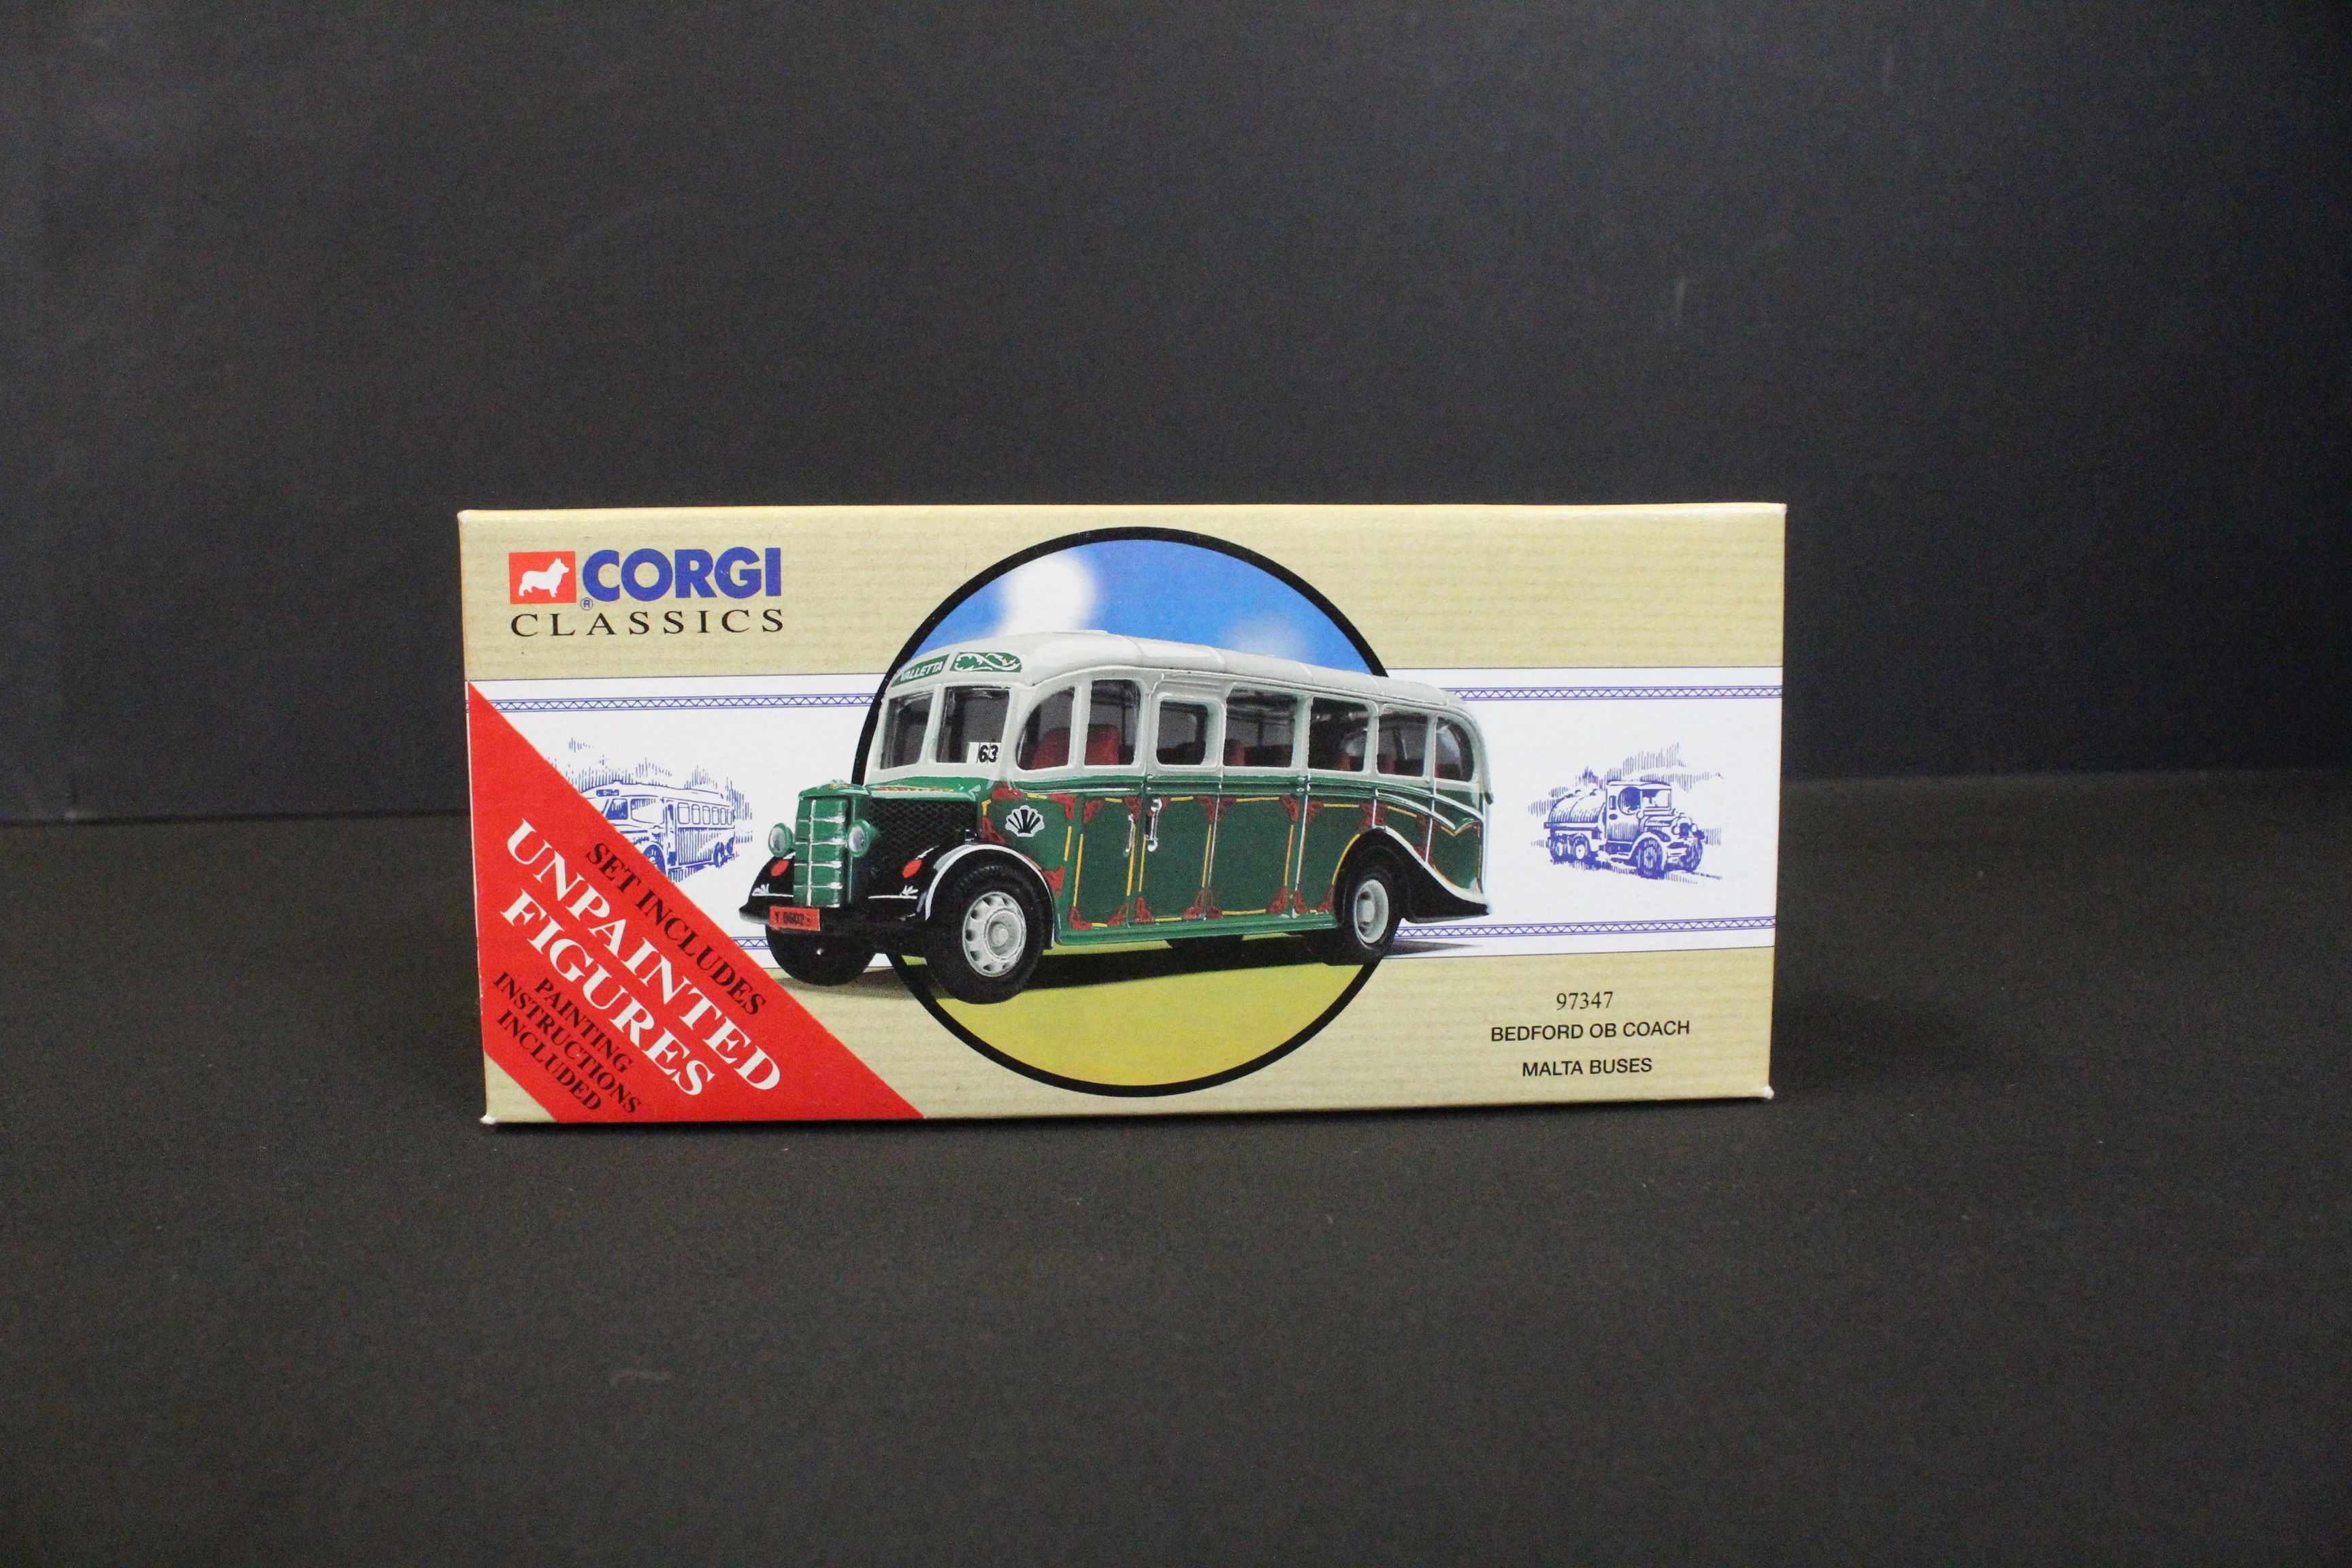 19 Boxed Corgi Public Transport from Corgi diecast models to include 2 x 97870 Karrier W4 - Image 5 of 7